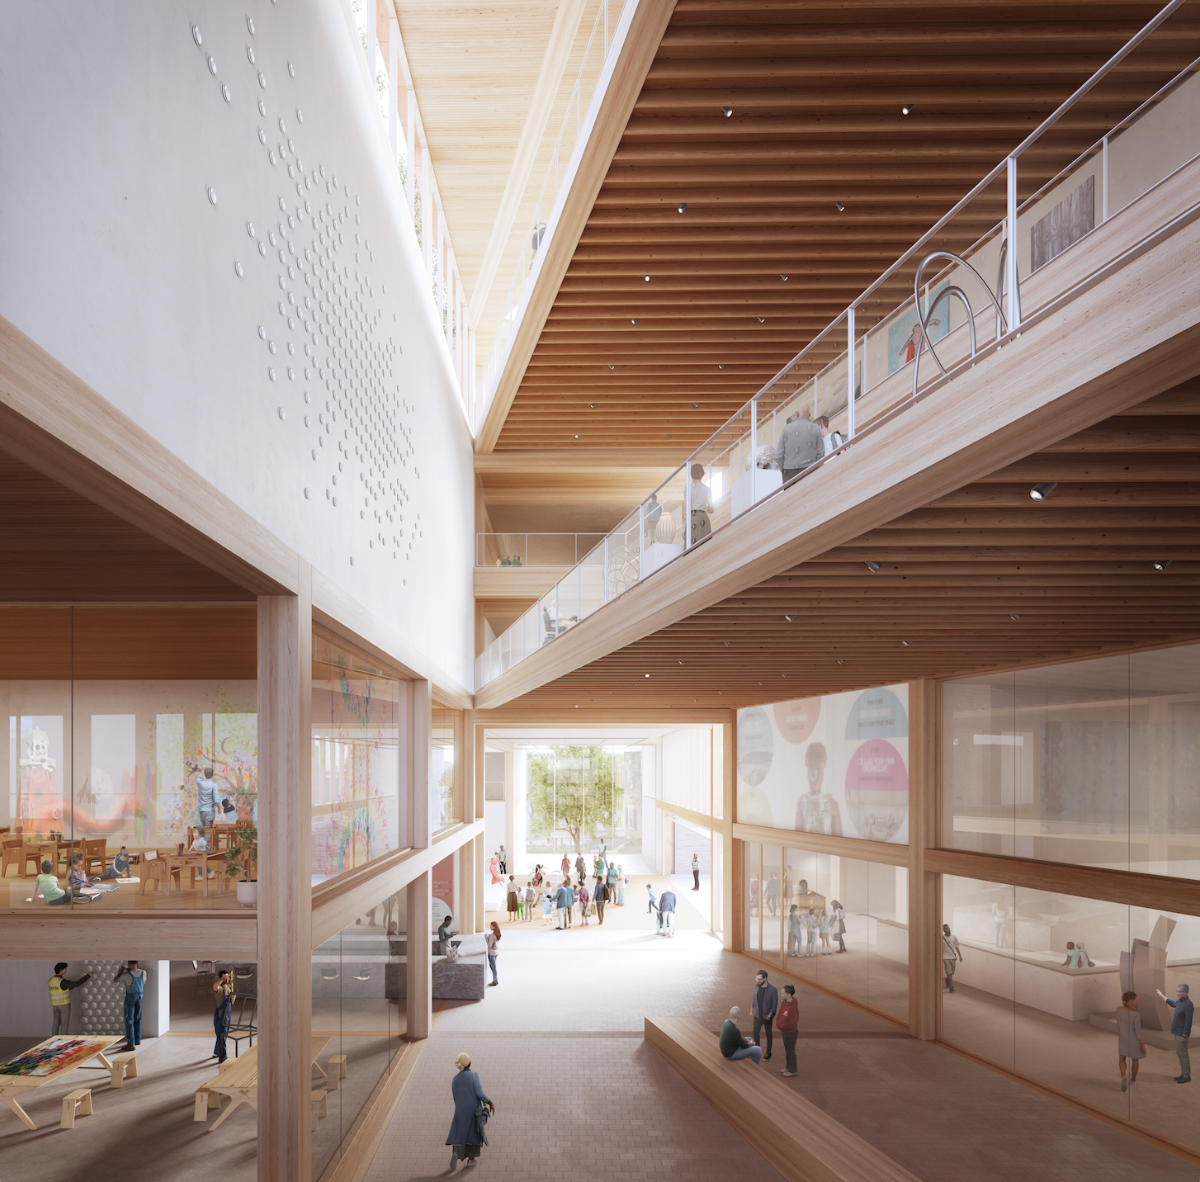 Lever Architecture's design for the Portland Museum of Art, rendering by Darcstudio Portland Museum of Art, Maine / Dovetail Design Strategists
